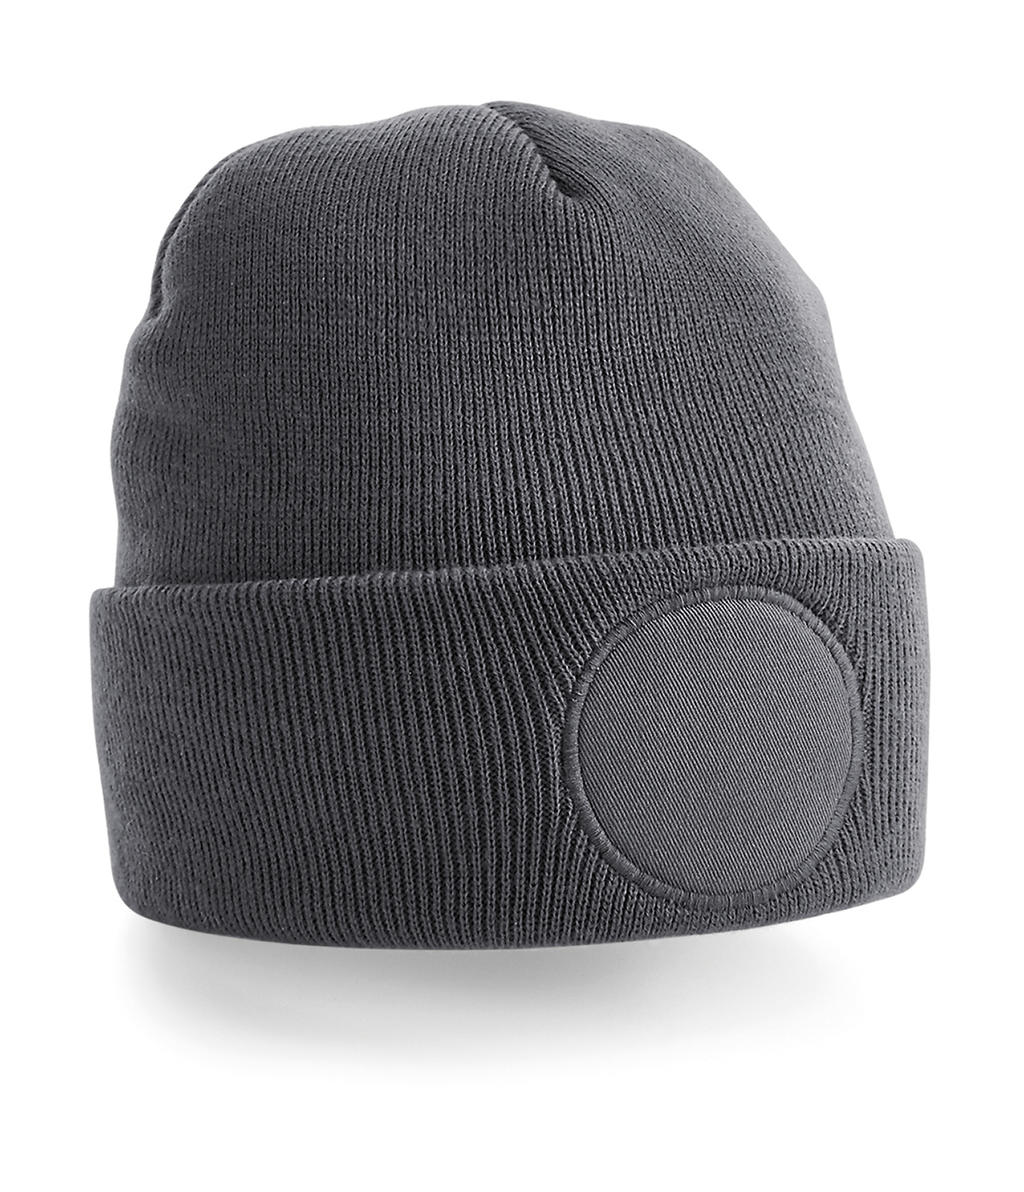  Circular Patch Beanie in Farbe Graphite Grey